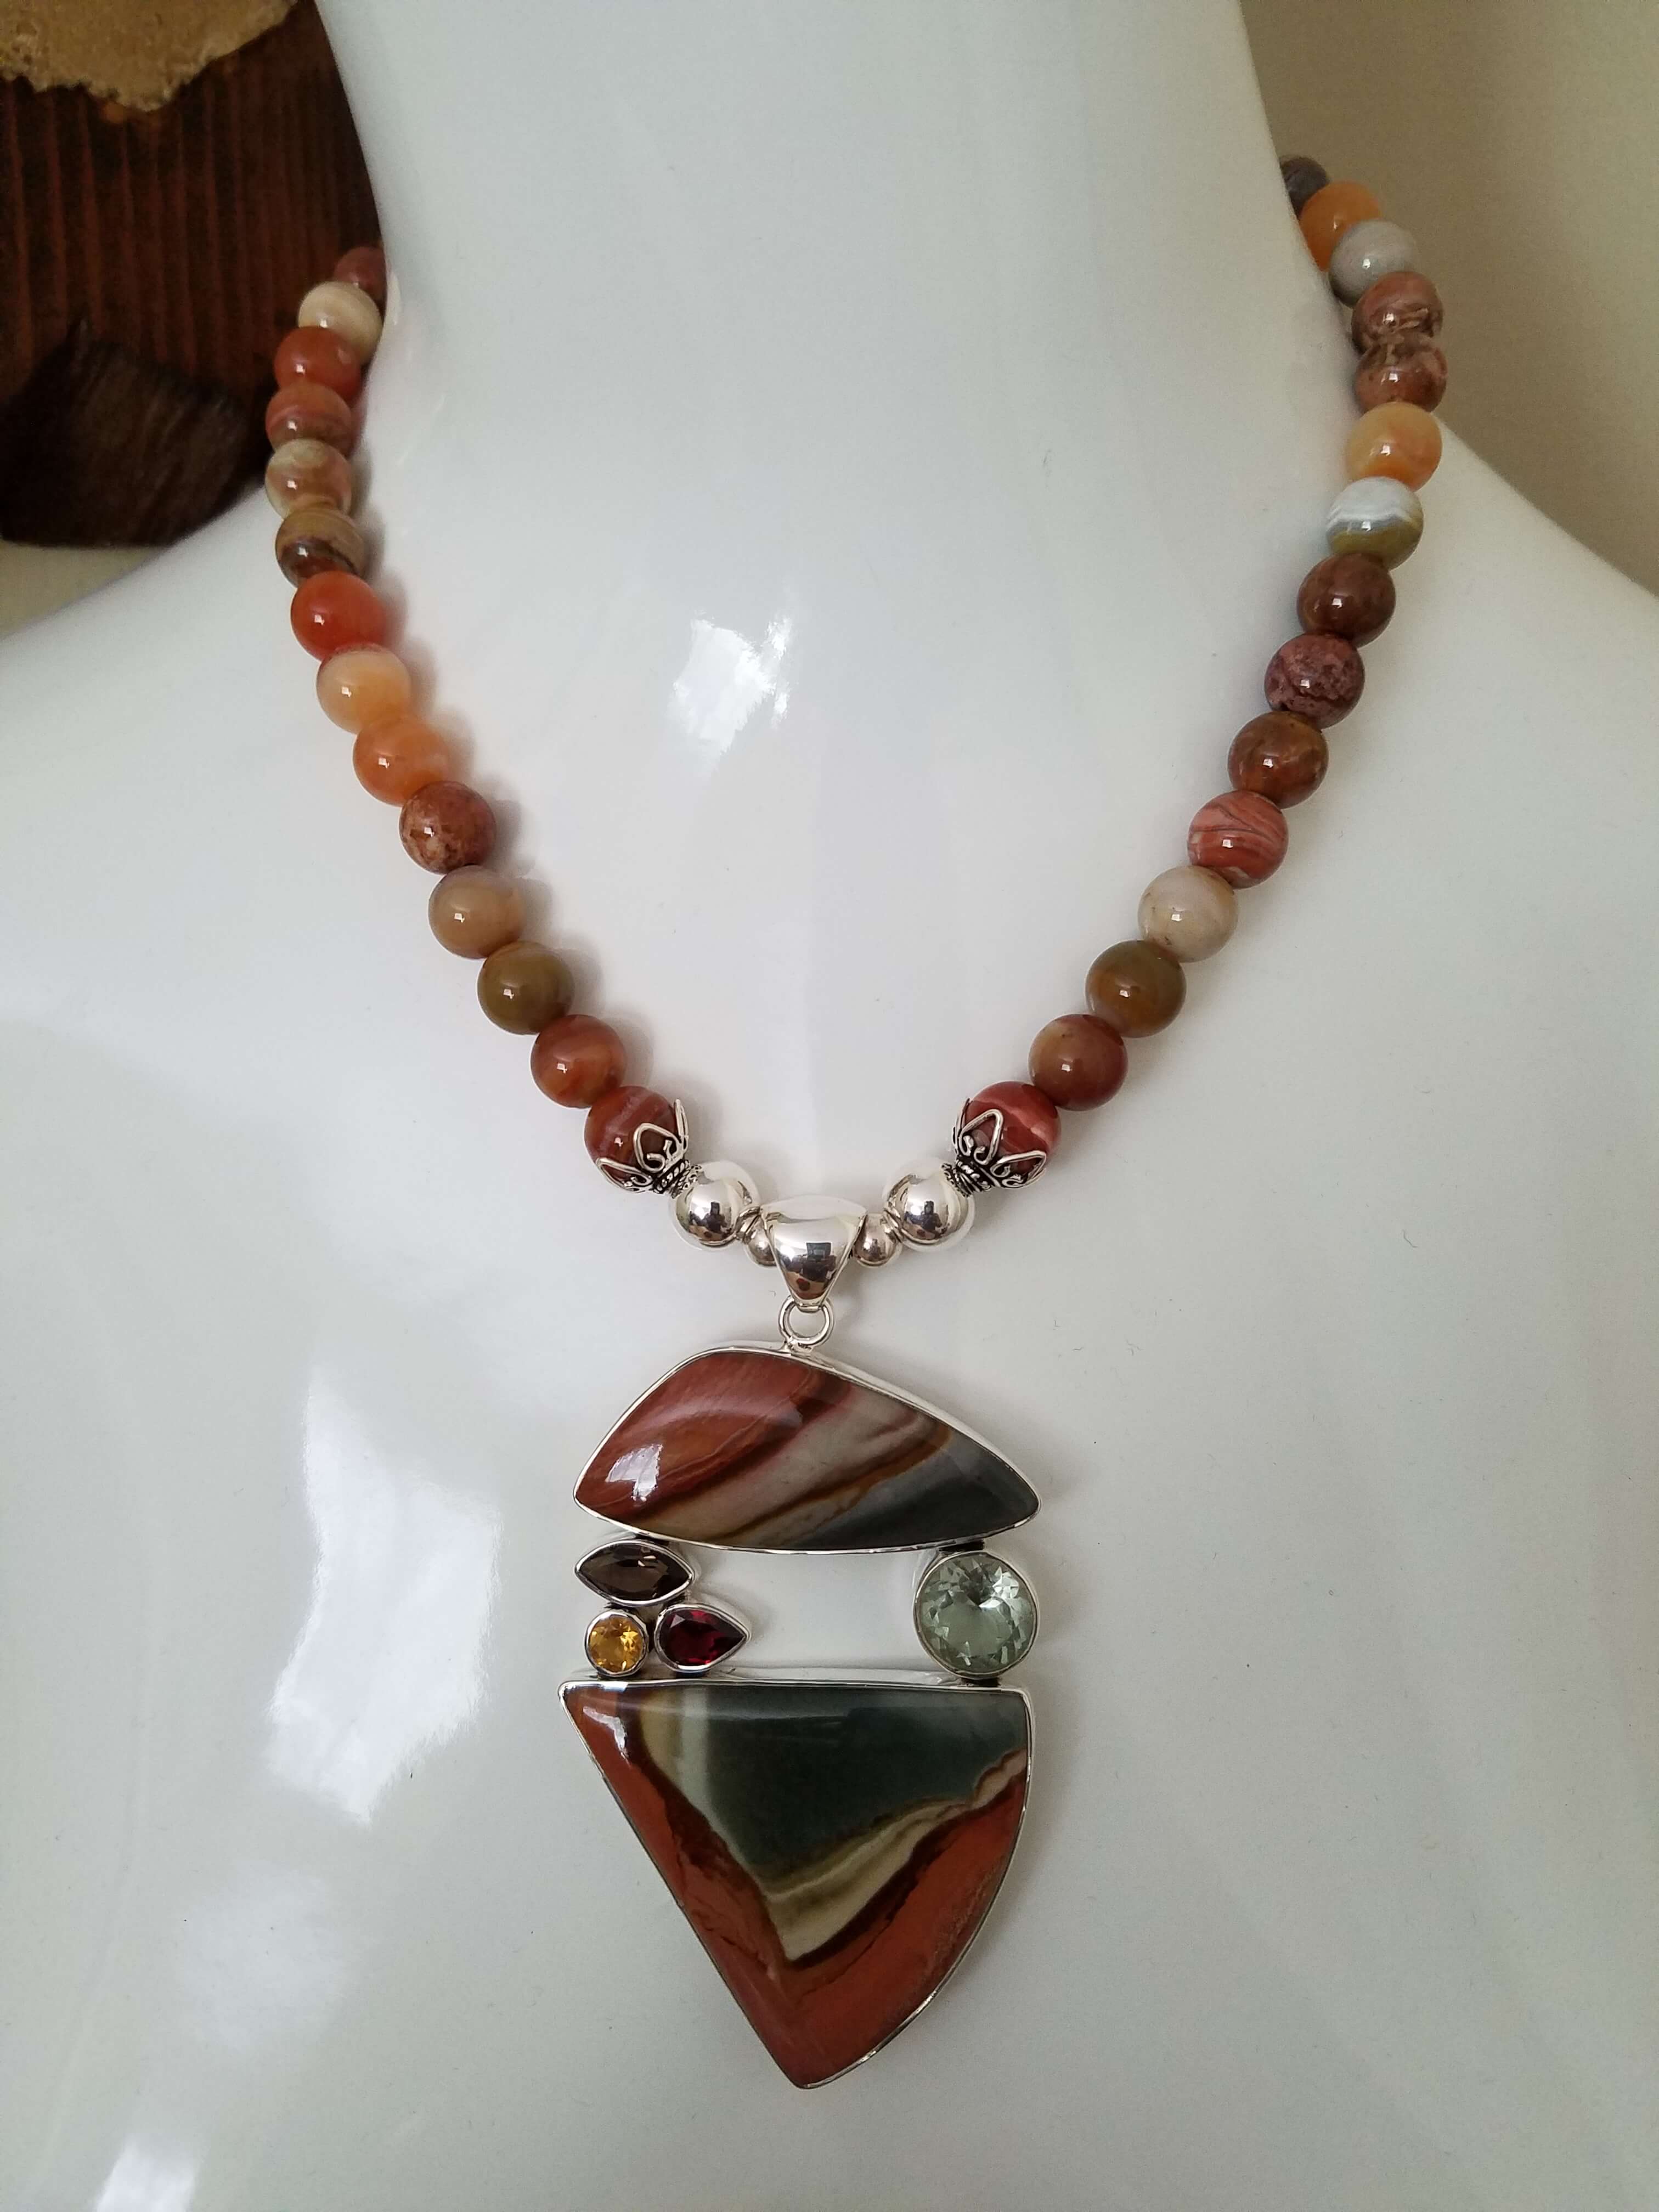 3G Co by Milton Garland, handcrafted jewelry, handcrafted pendant, handcrafted necklace, bead show, ny, upstate new york